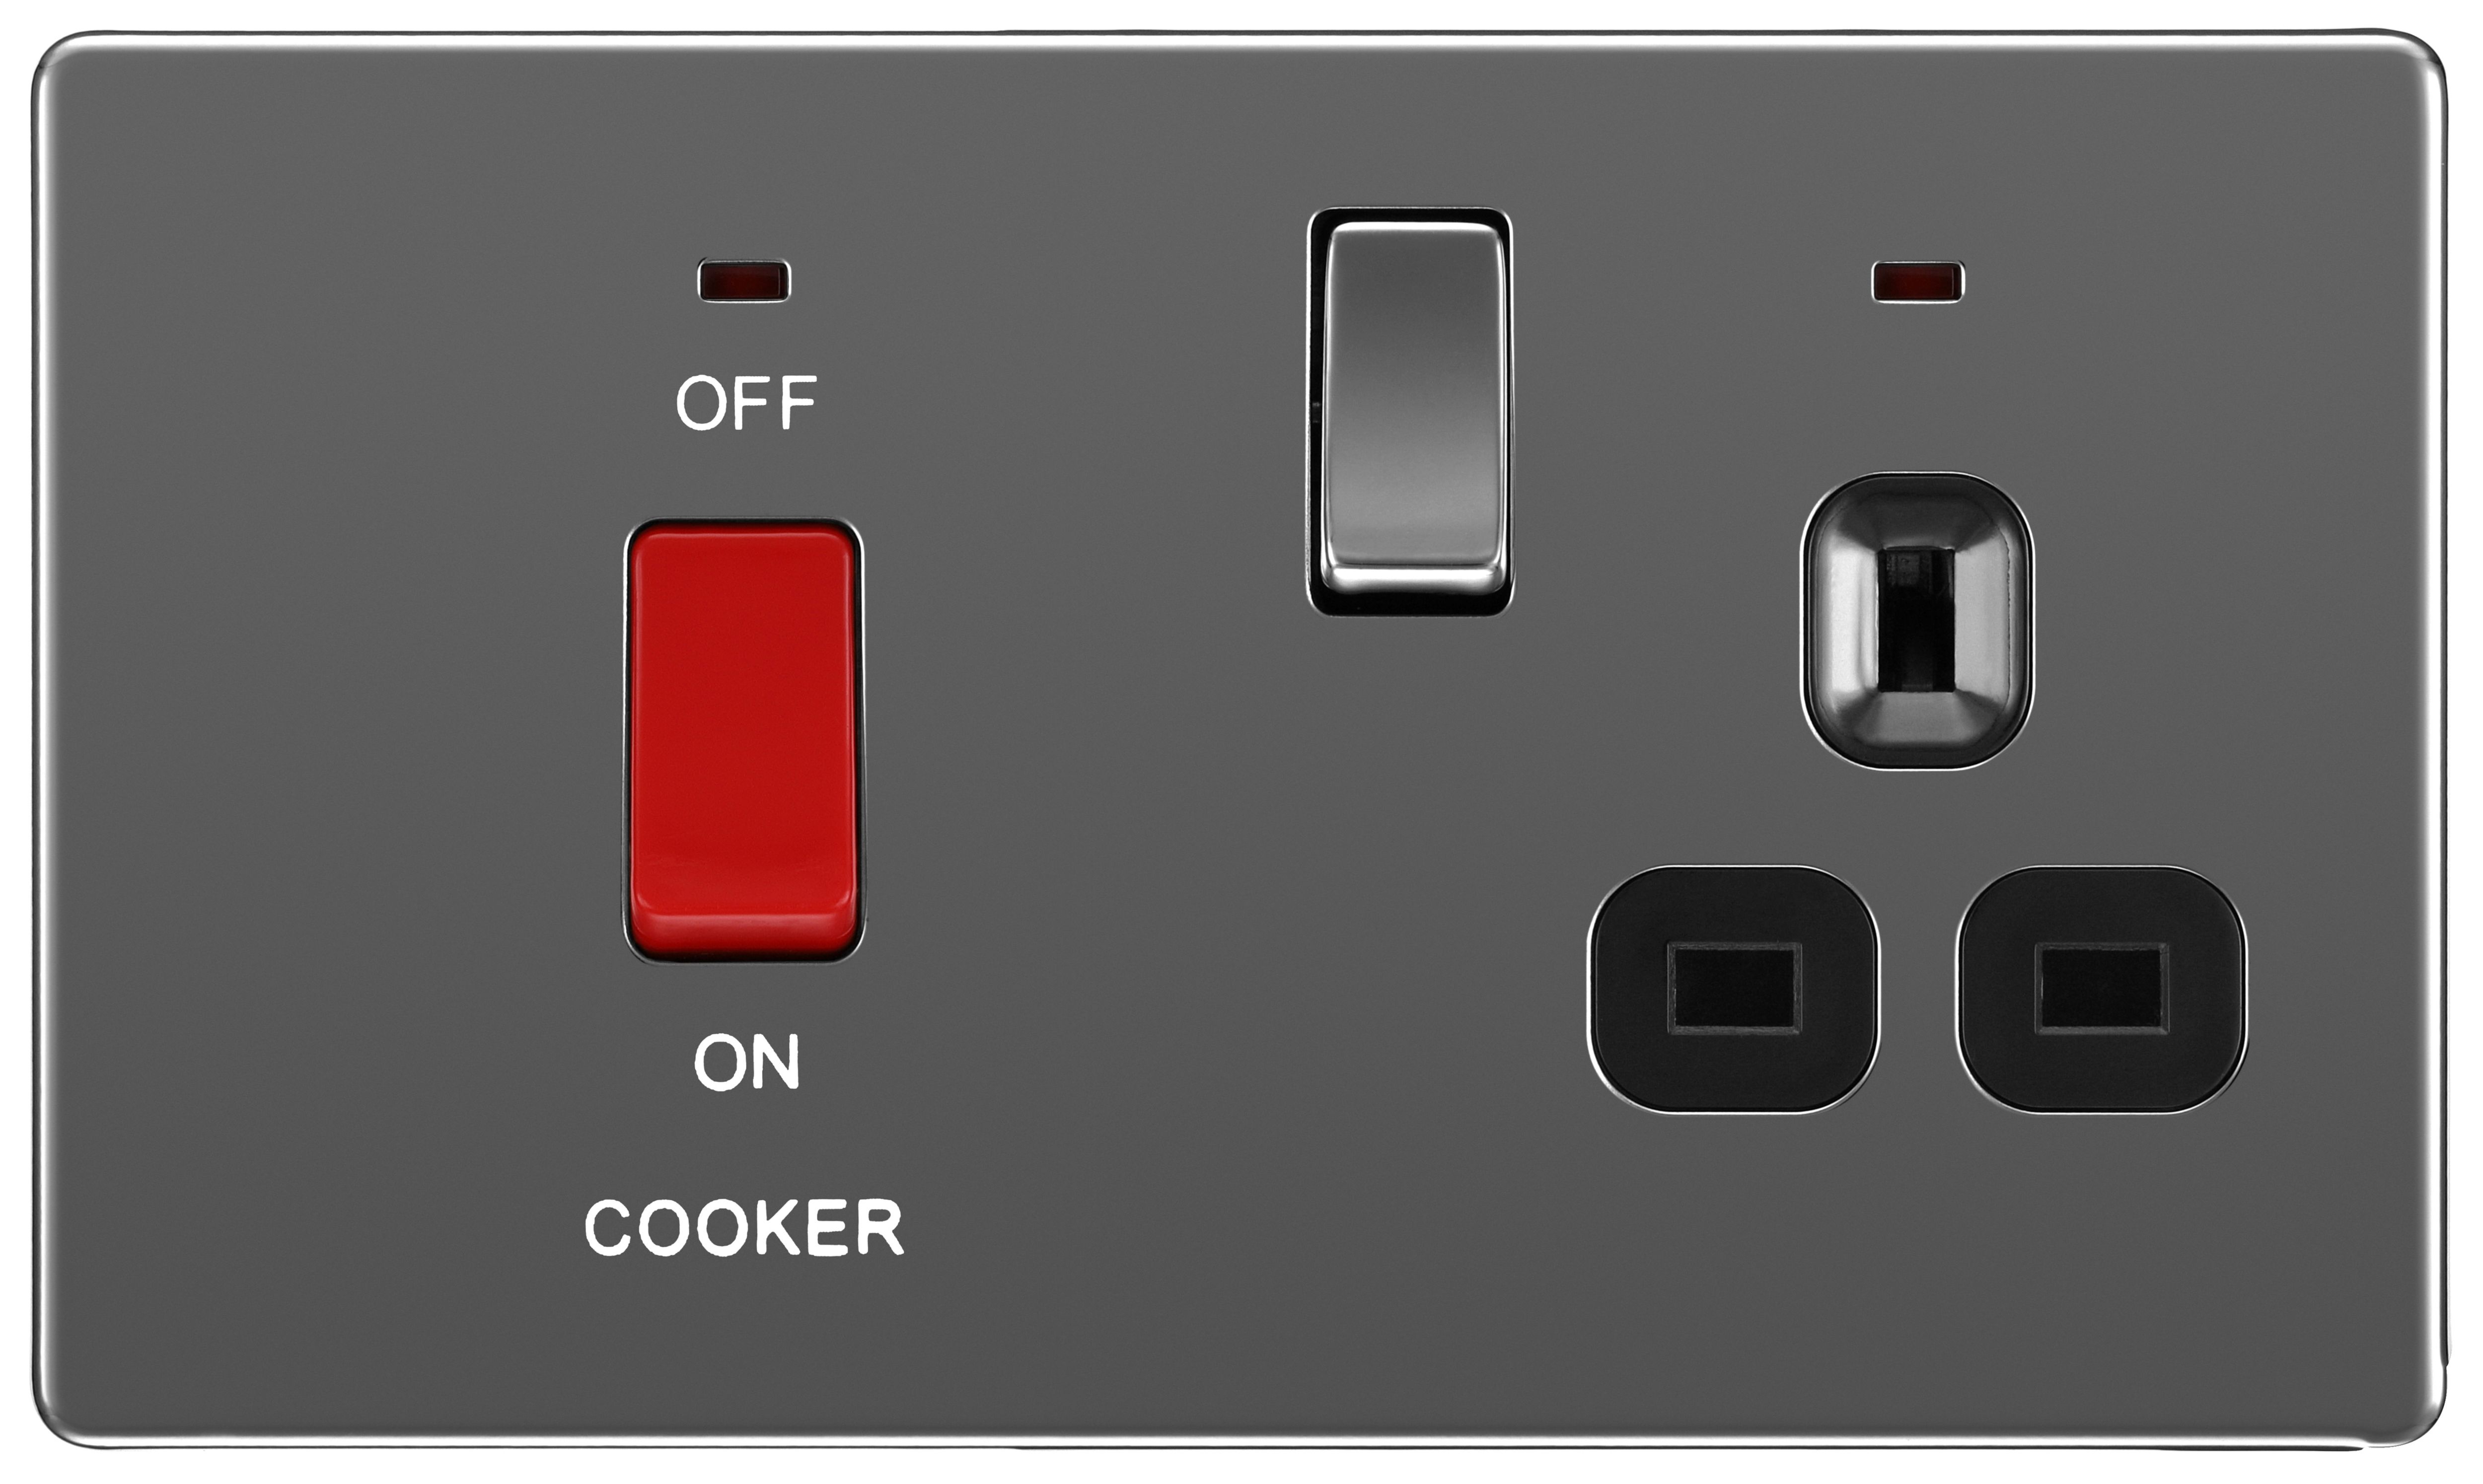 Image of BG 45 Amp Screwless Flat Plate Cooker Control Unit with Switched 13 Amp Power Socket Includes Power Indicators - Black Nickel